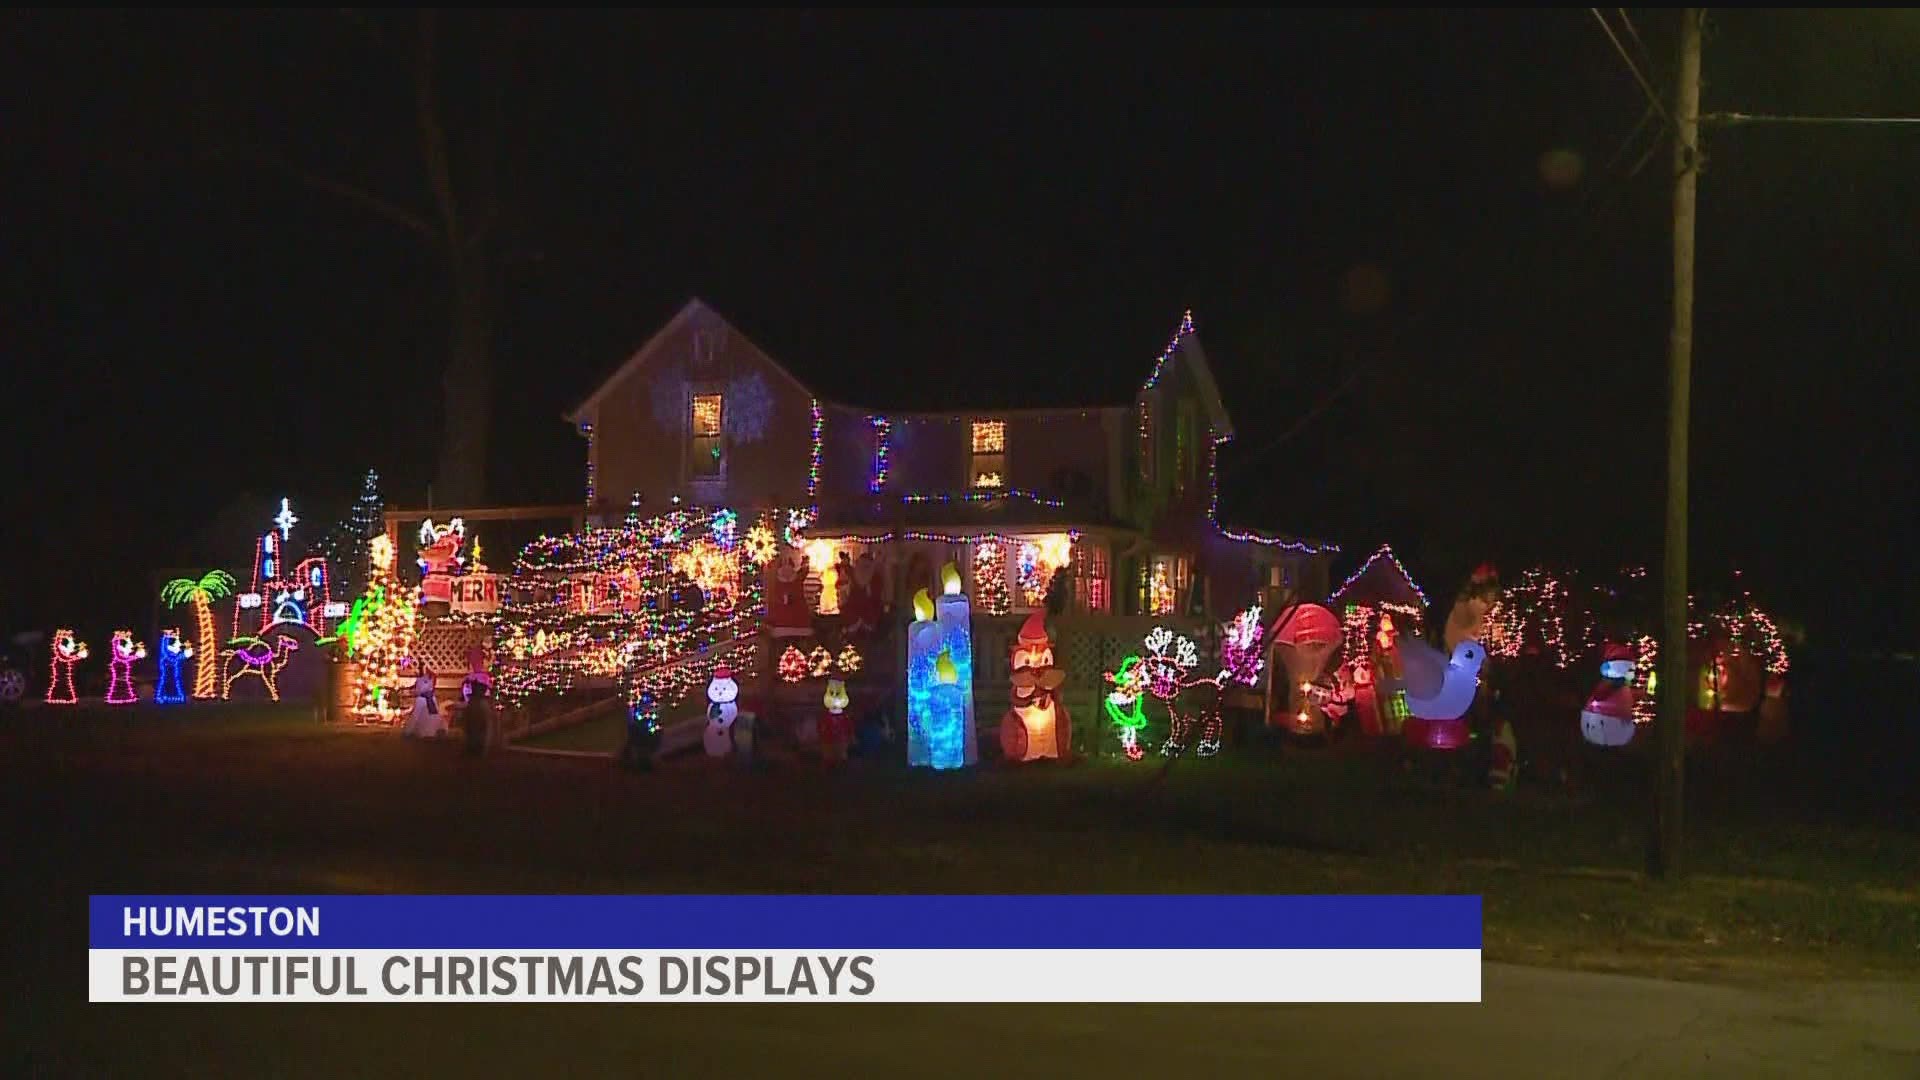 The people kind of need it this year— a whopping Christmas light display. Local 5 photojournalist Eric Gooden takes us to Humeston, Iowa to take a look.